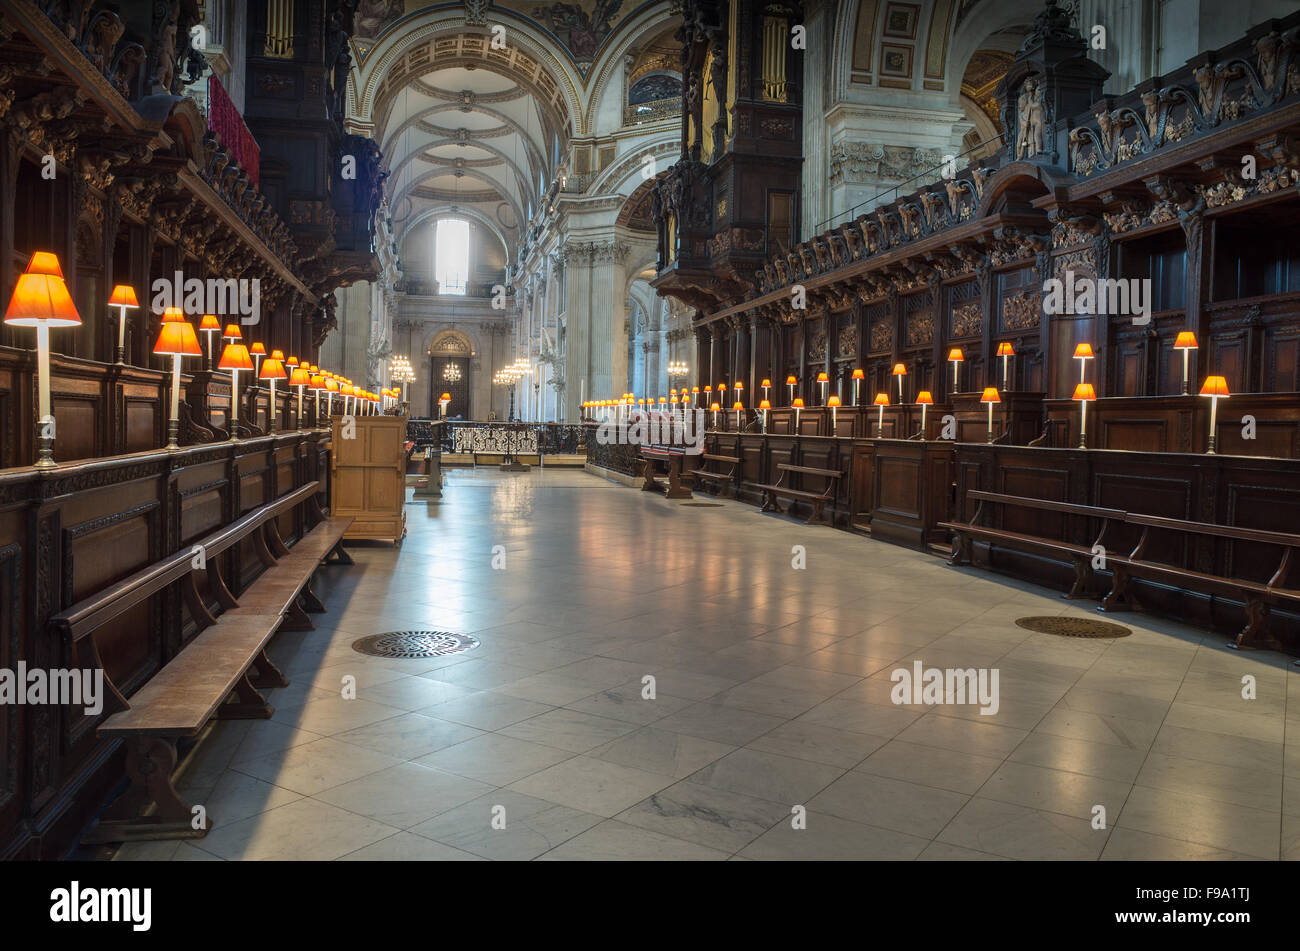 The quire at St Paul's cathedral, London, as seen from the east end of the cathedral. Stock Photo